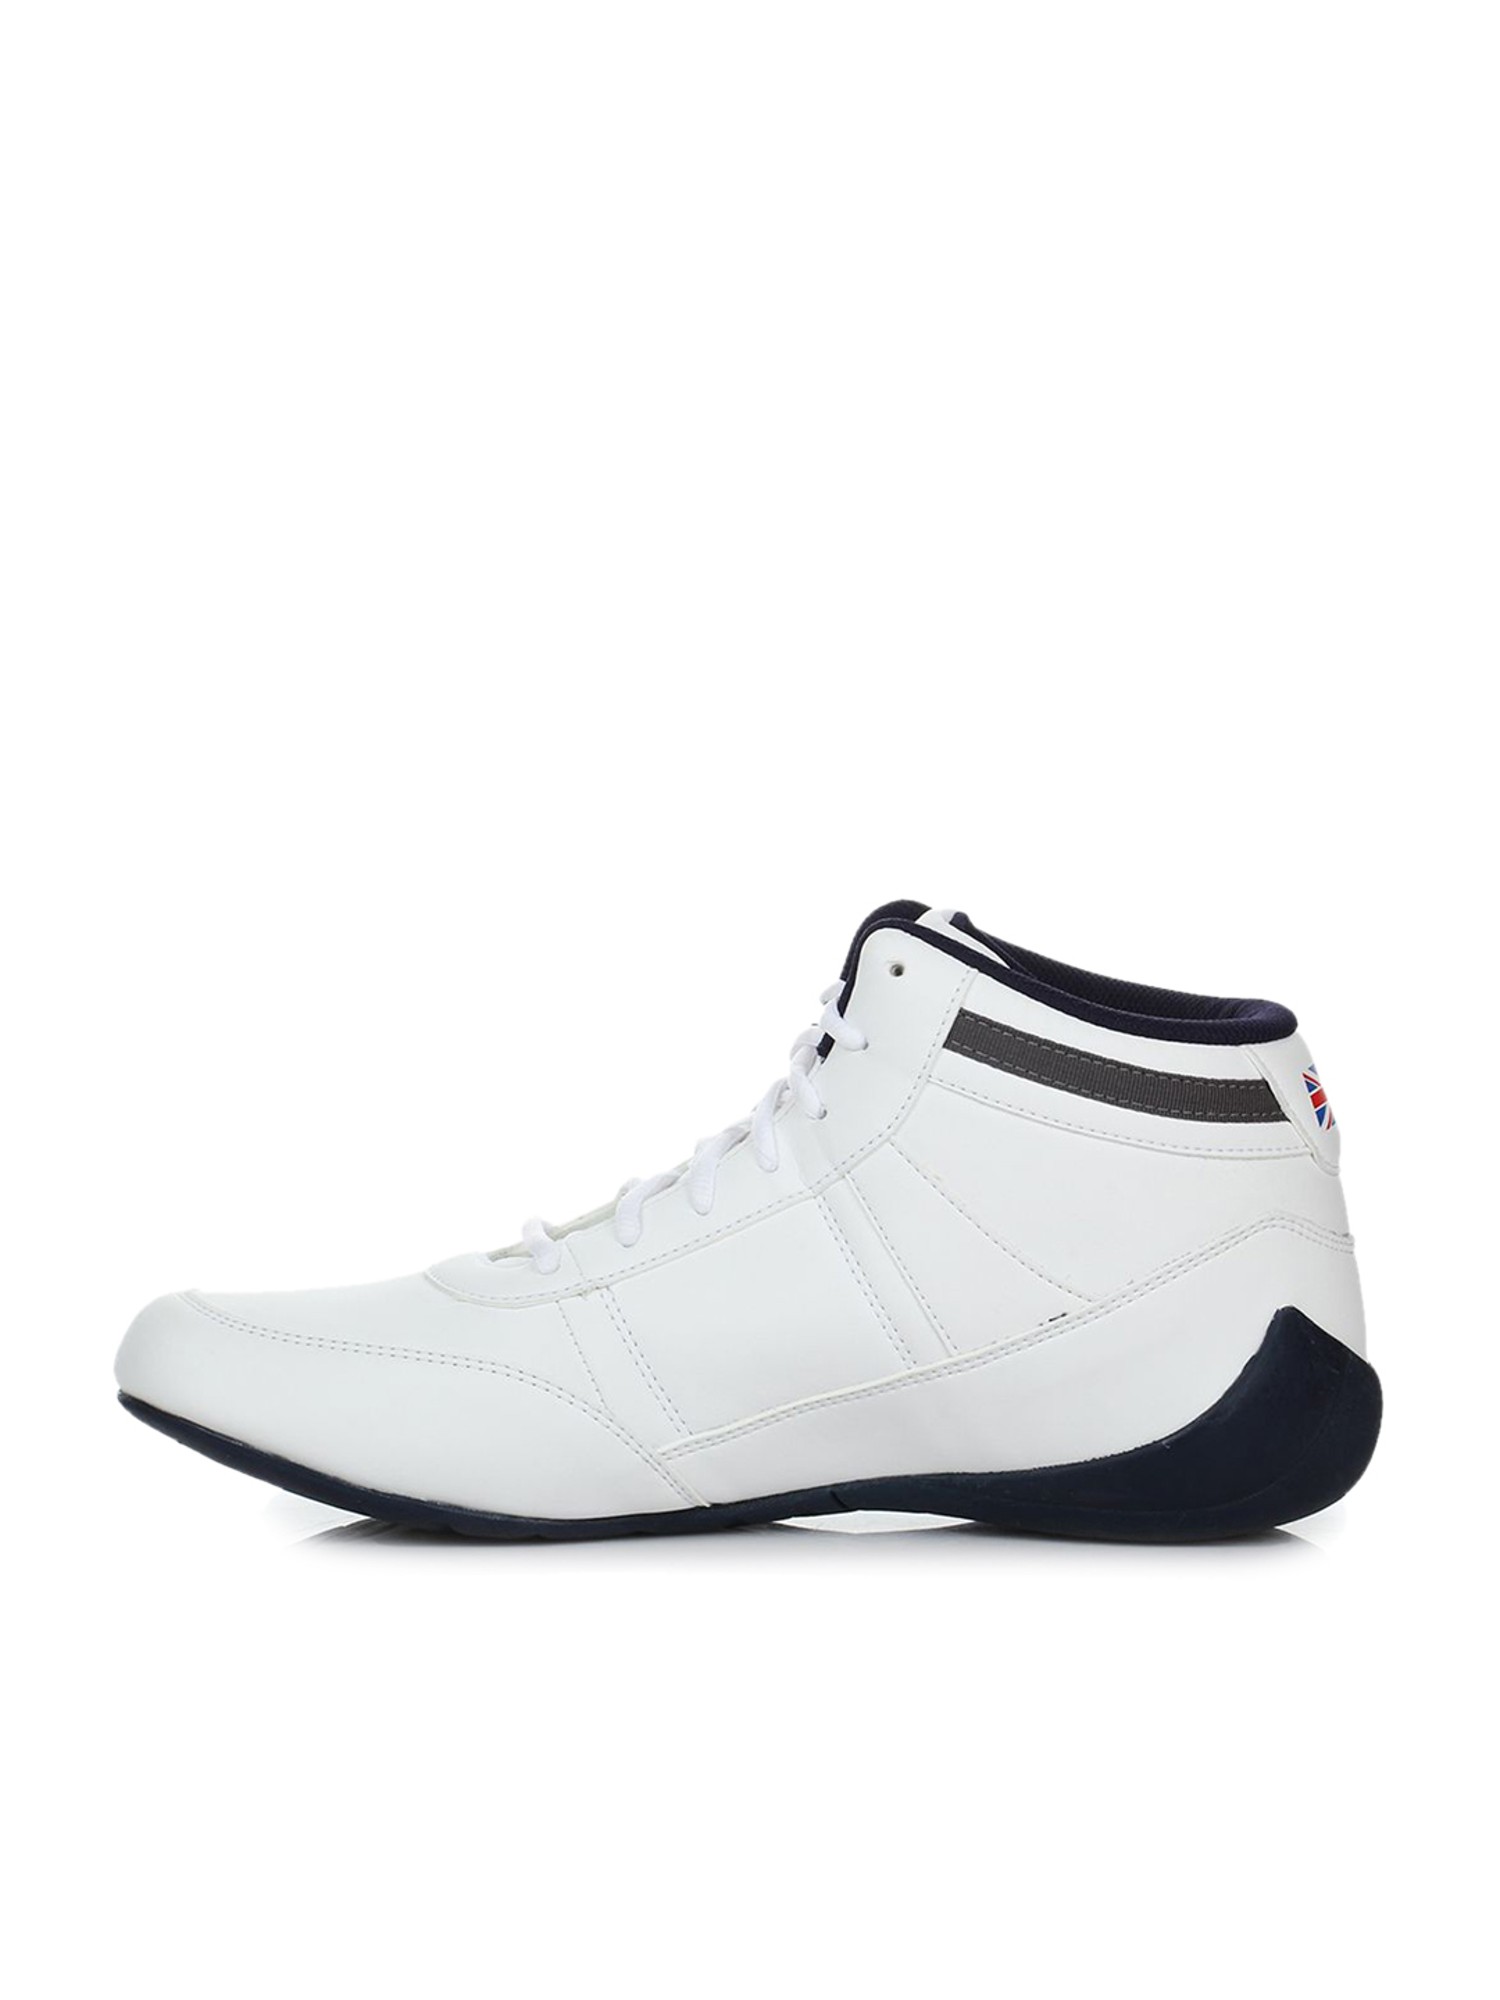 Buy Columbus Sneakers & Casual shoes for Men Online | FASHIOLA.in